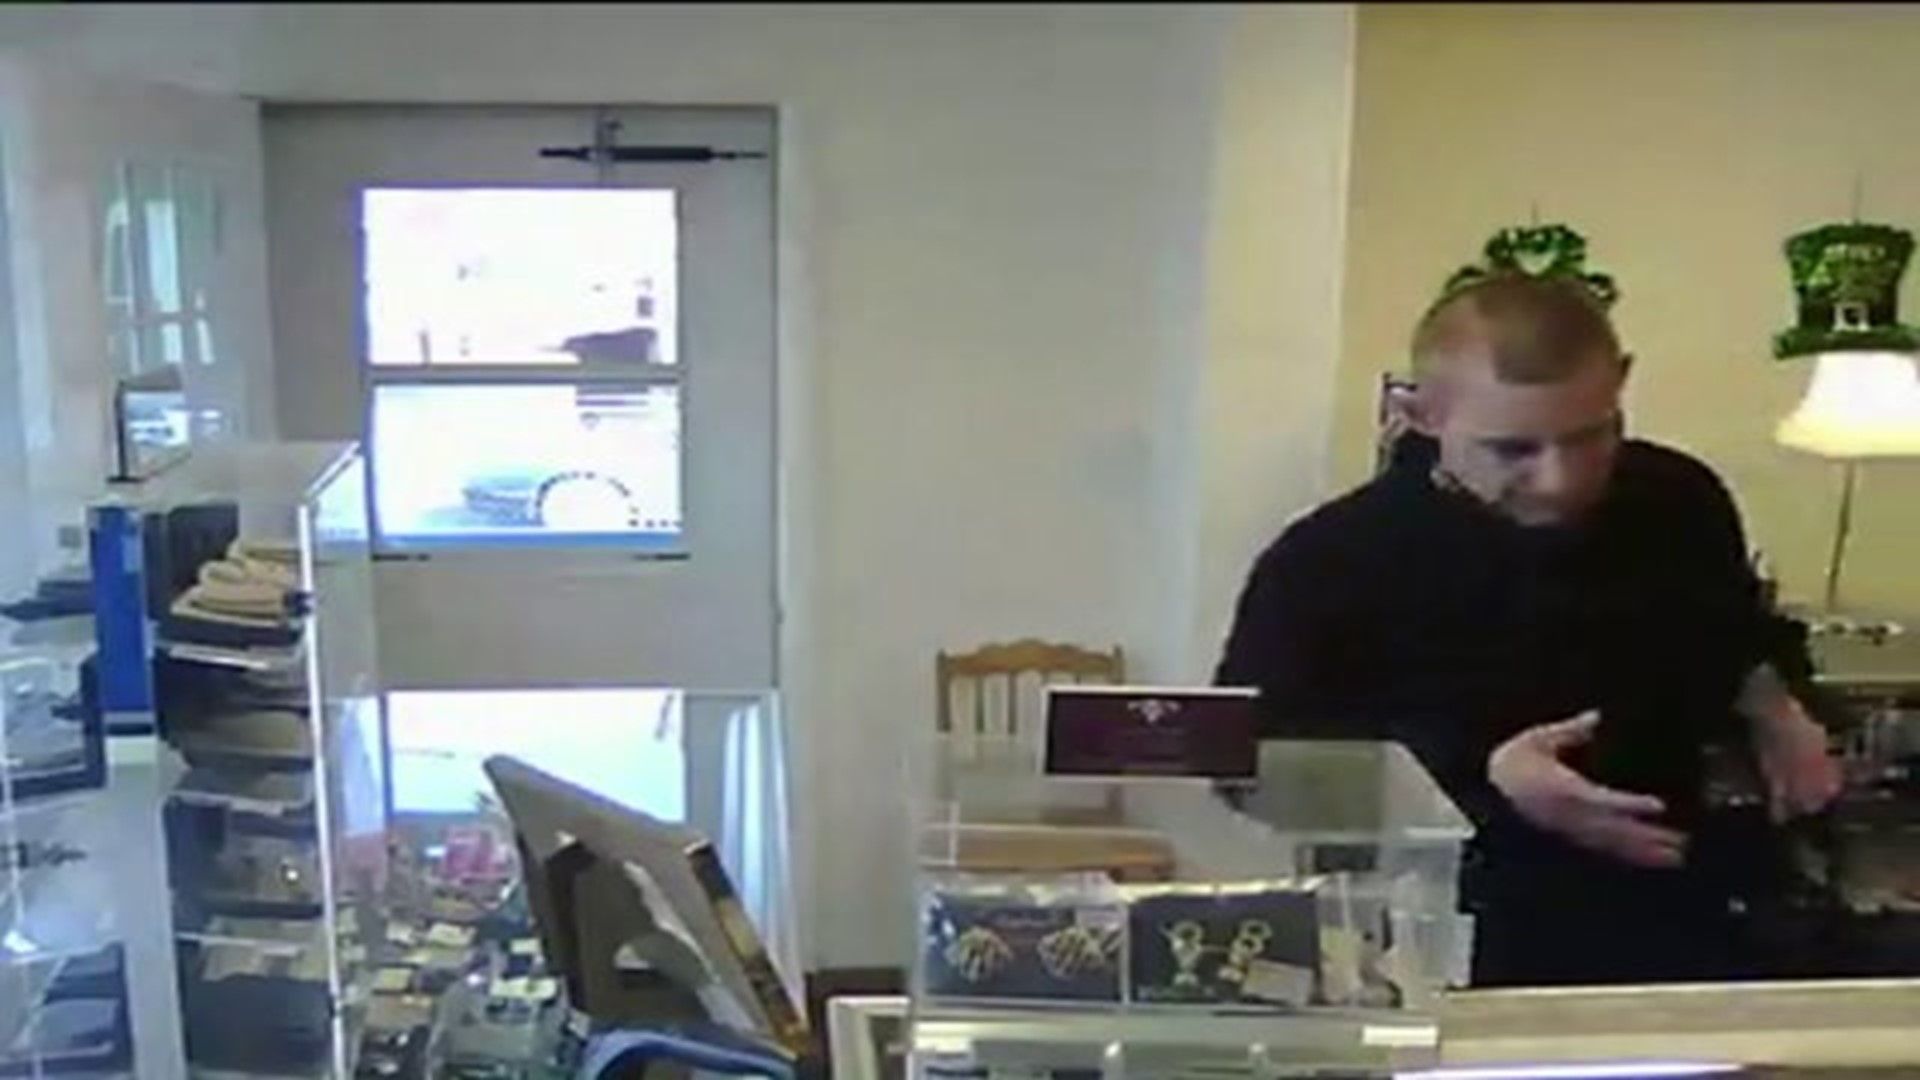 Police in Wyoming County Looking for Jewelry Thief